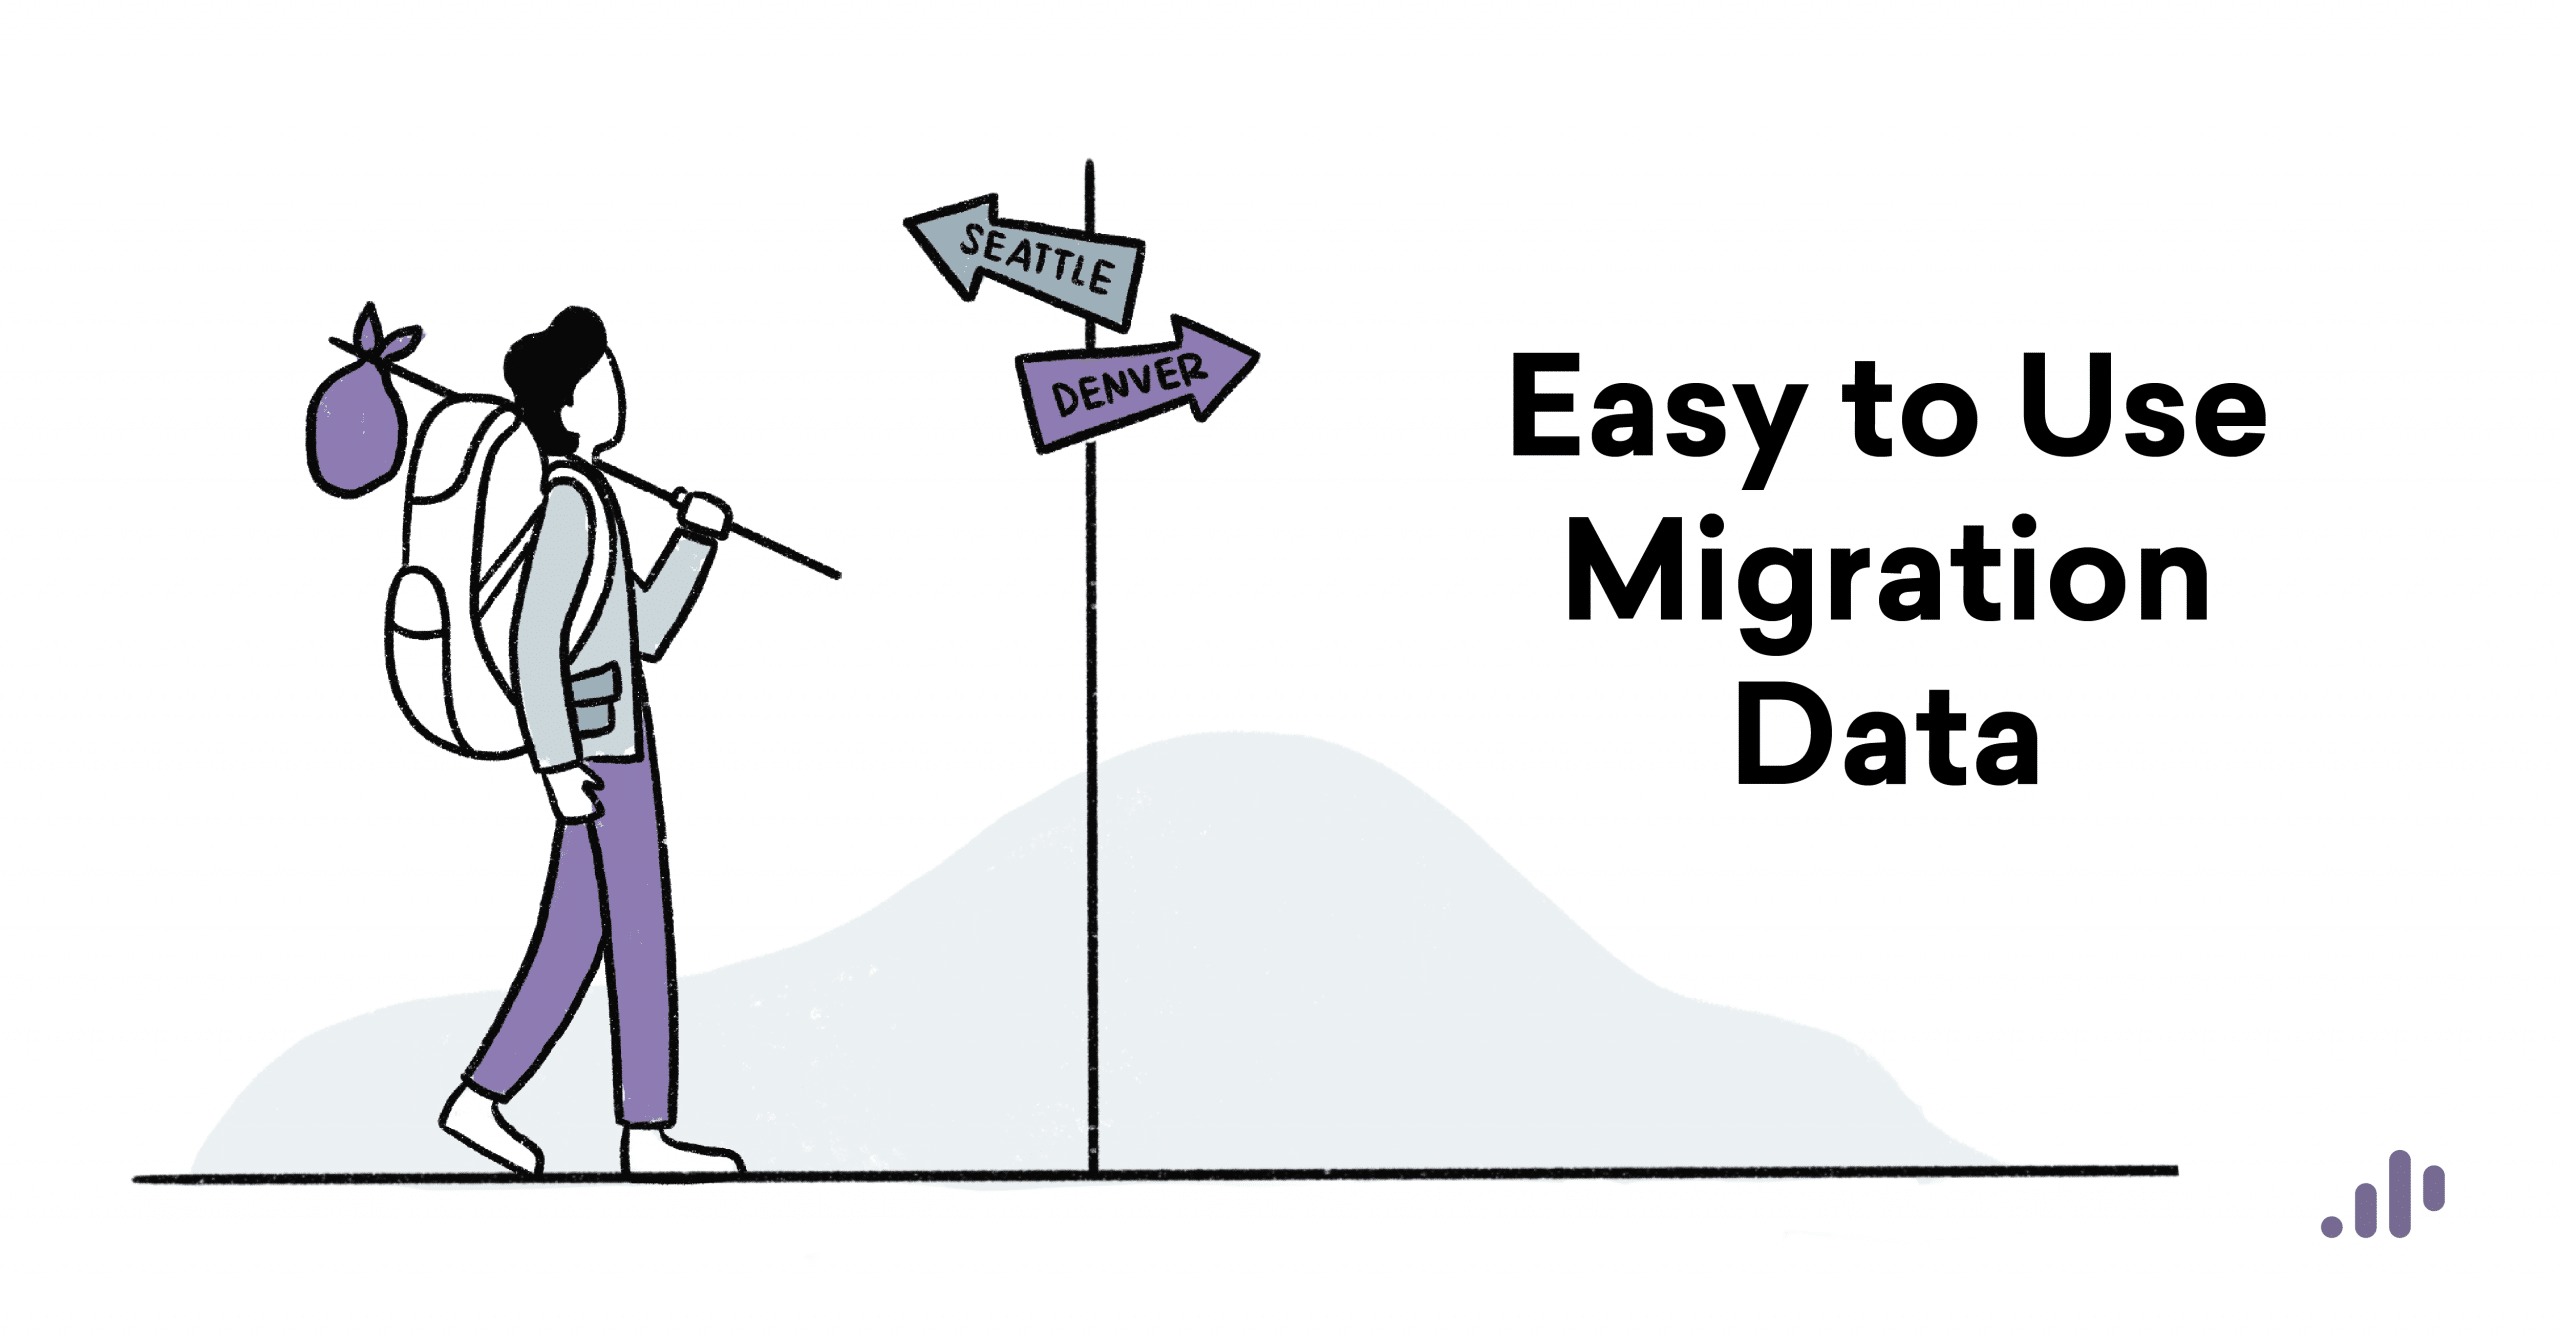 Easy to Use Migration Data